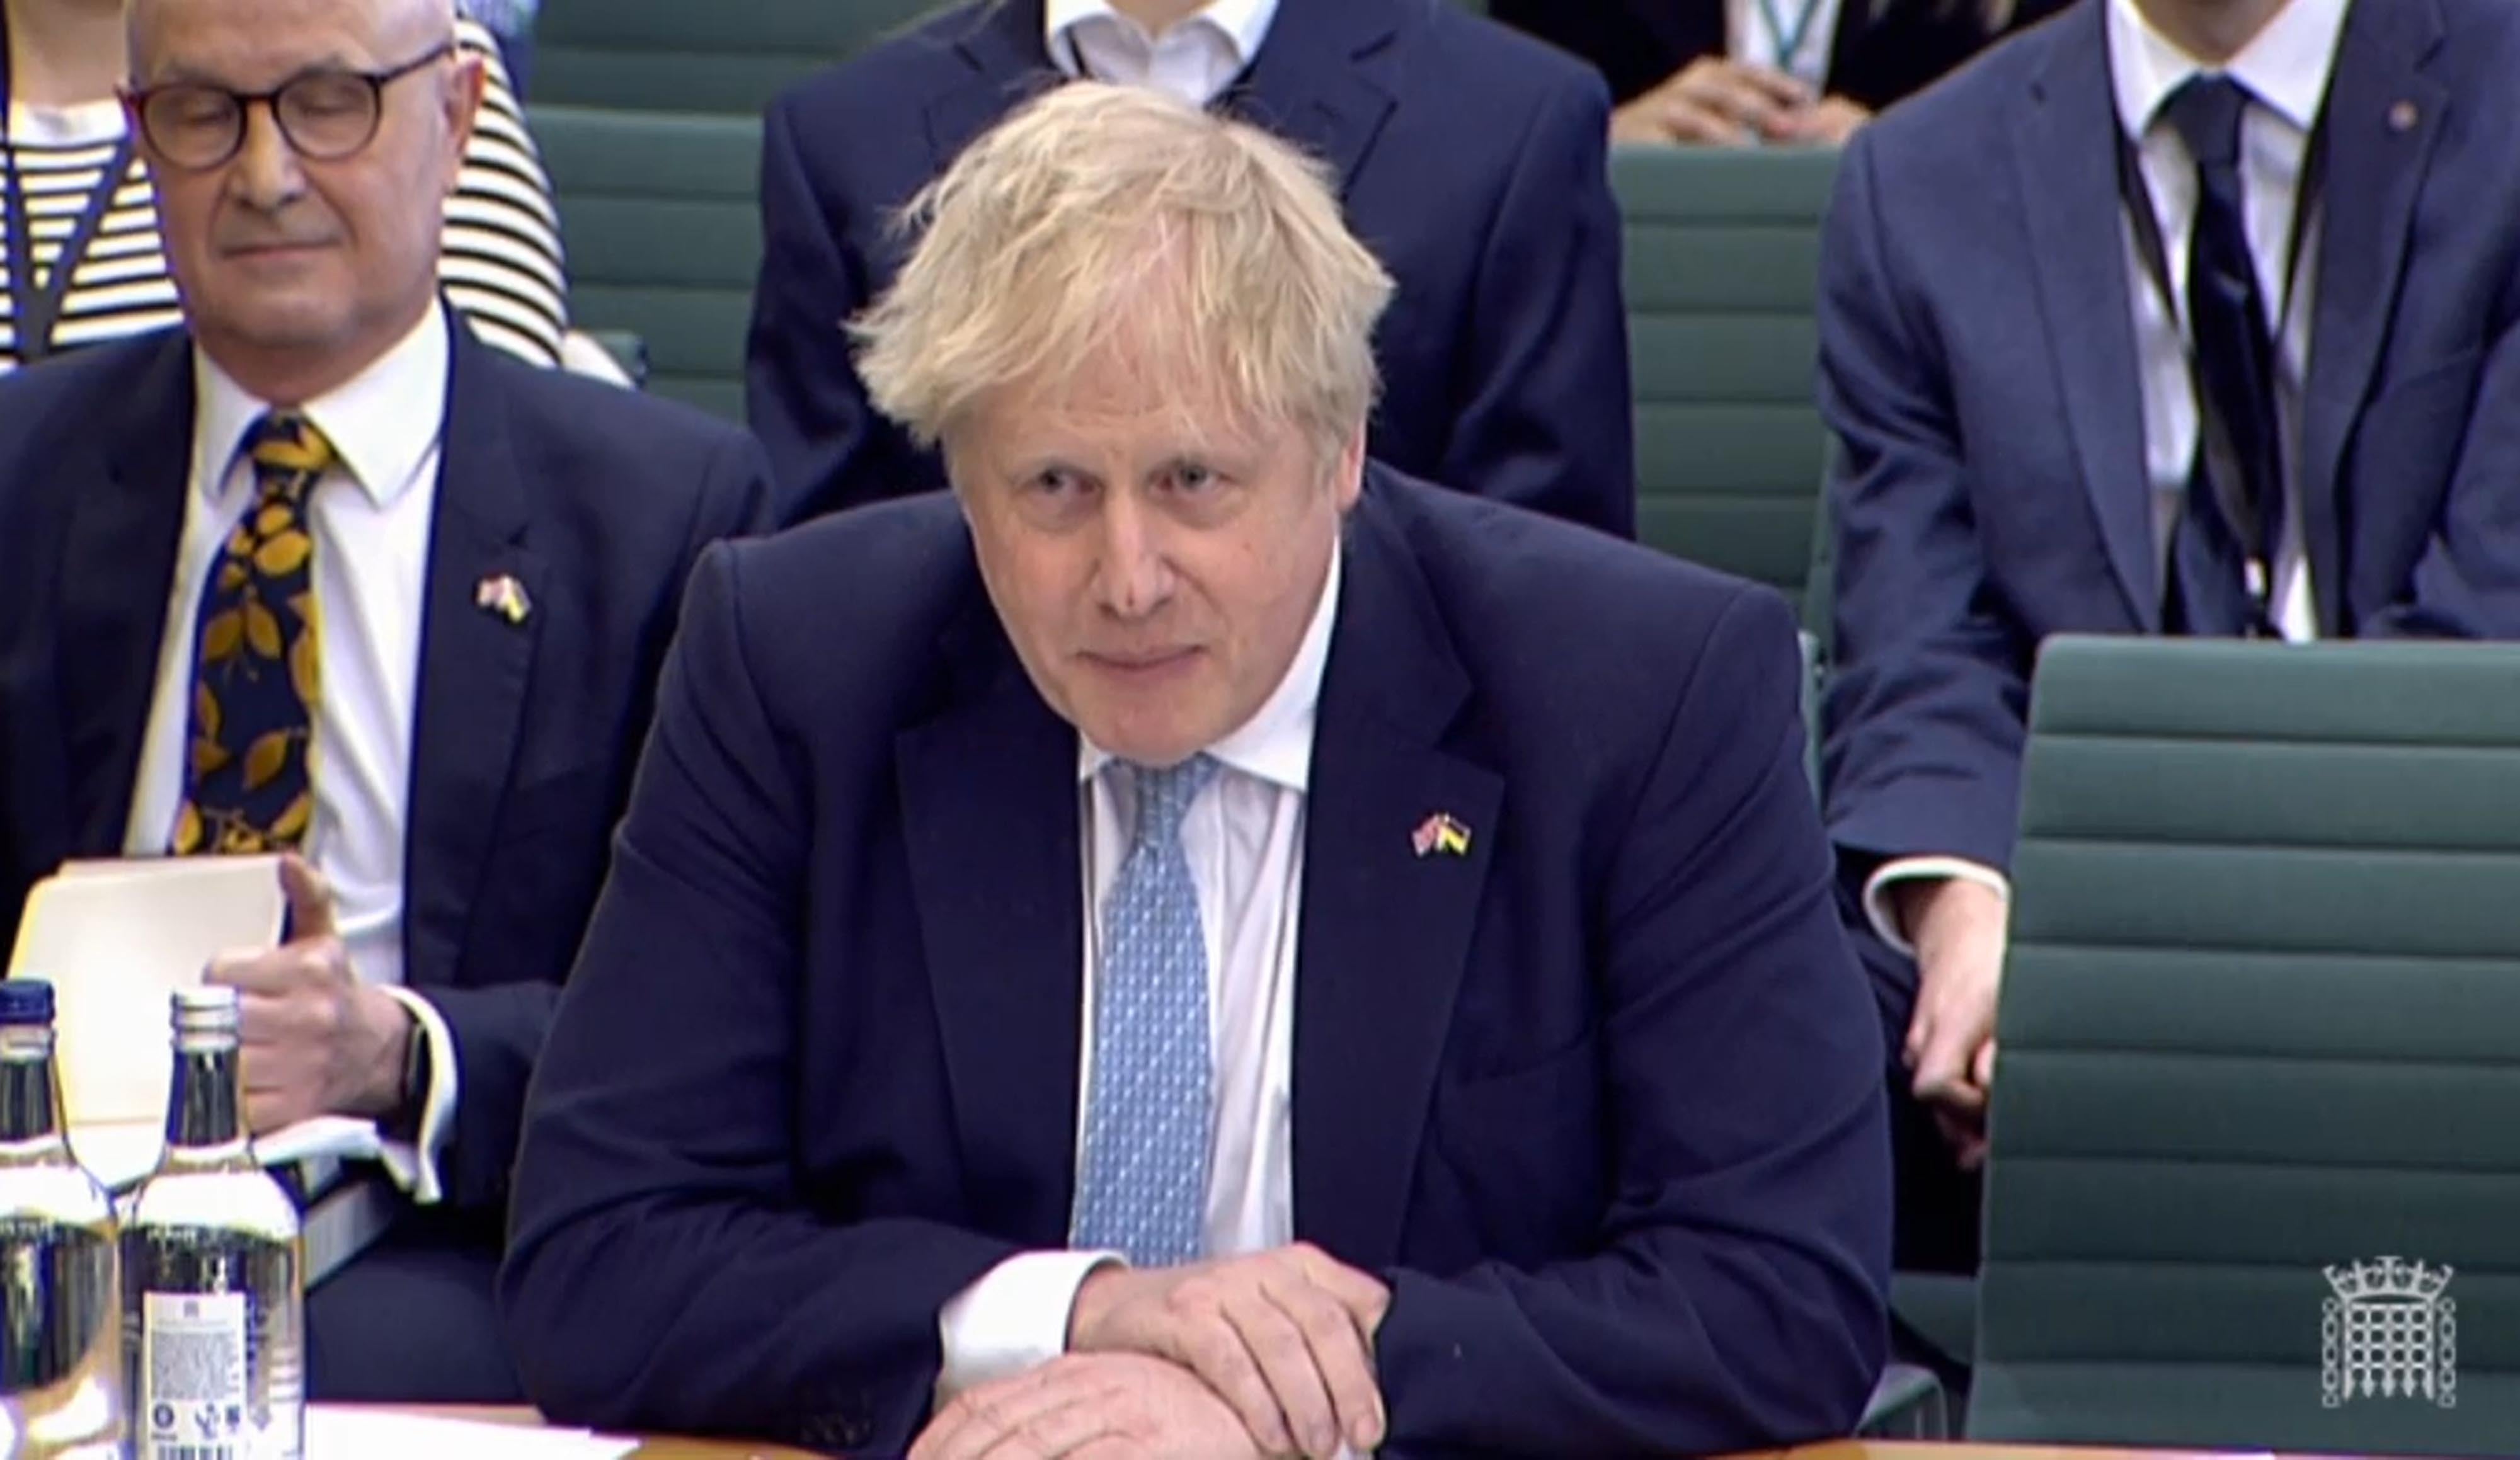 Prime Minister Boris Johnson answers questions in front of the Liaison Committee in the House of Commons (House of Commons/PA)